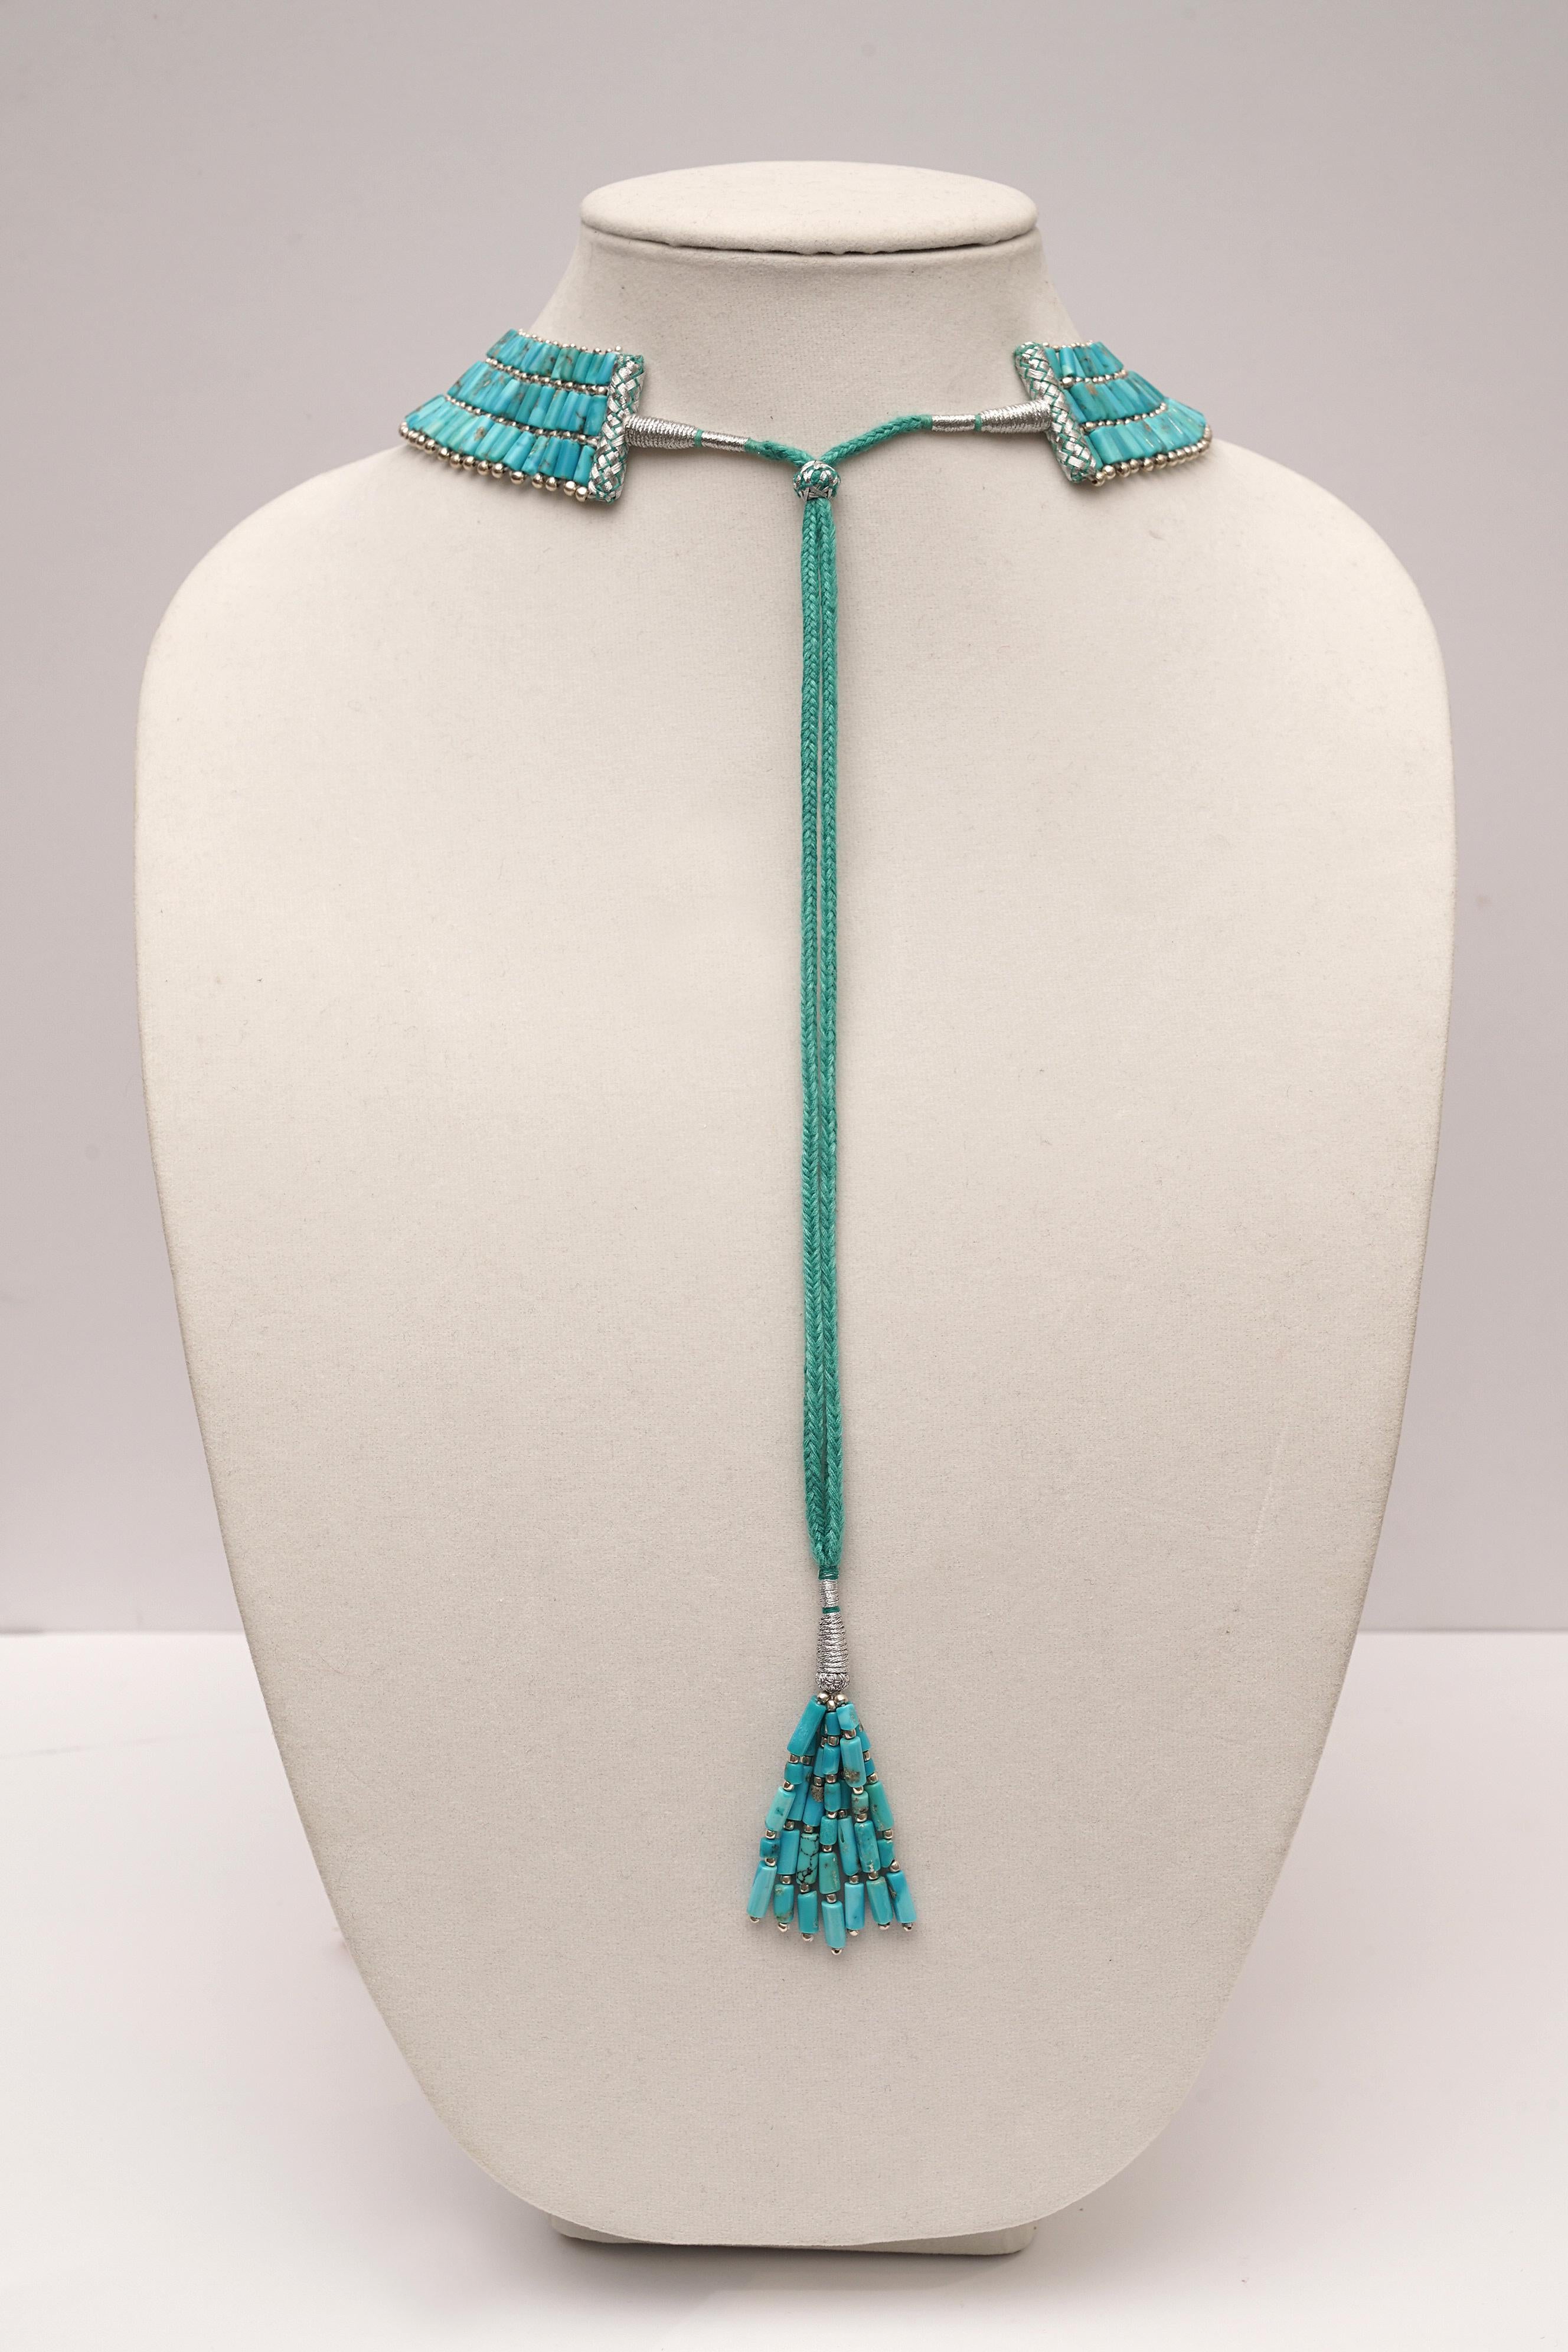 Stunning triple-row turquoise collar necklace bordered with sterling silver beads.  Bolero clasp allows the length to be adjustable and a cluster of turquoise drapes down the back.  Wear on an open neckline or inside a button down shirt.  Lovely and